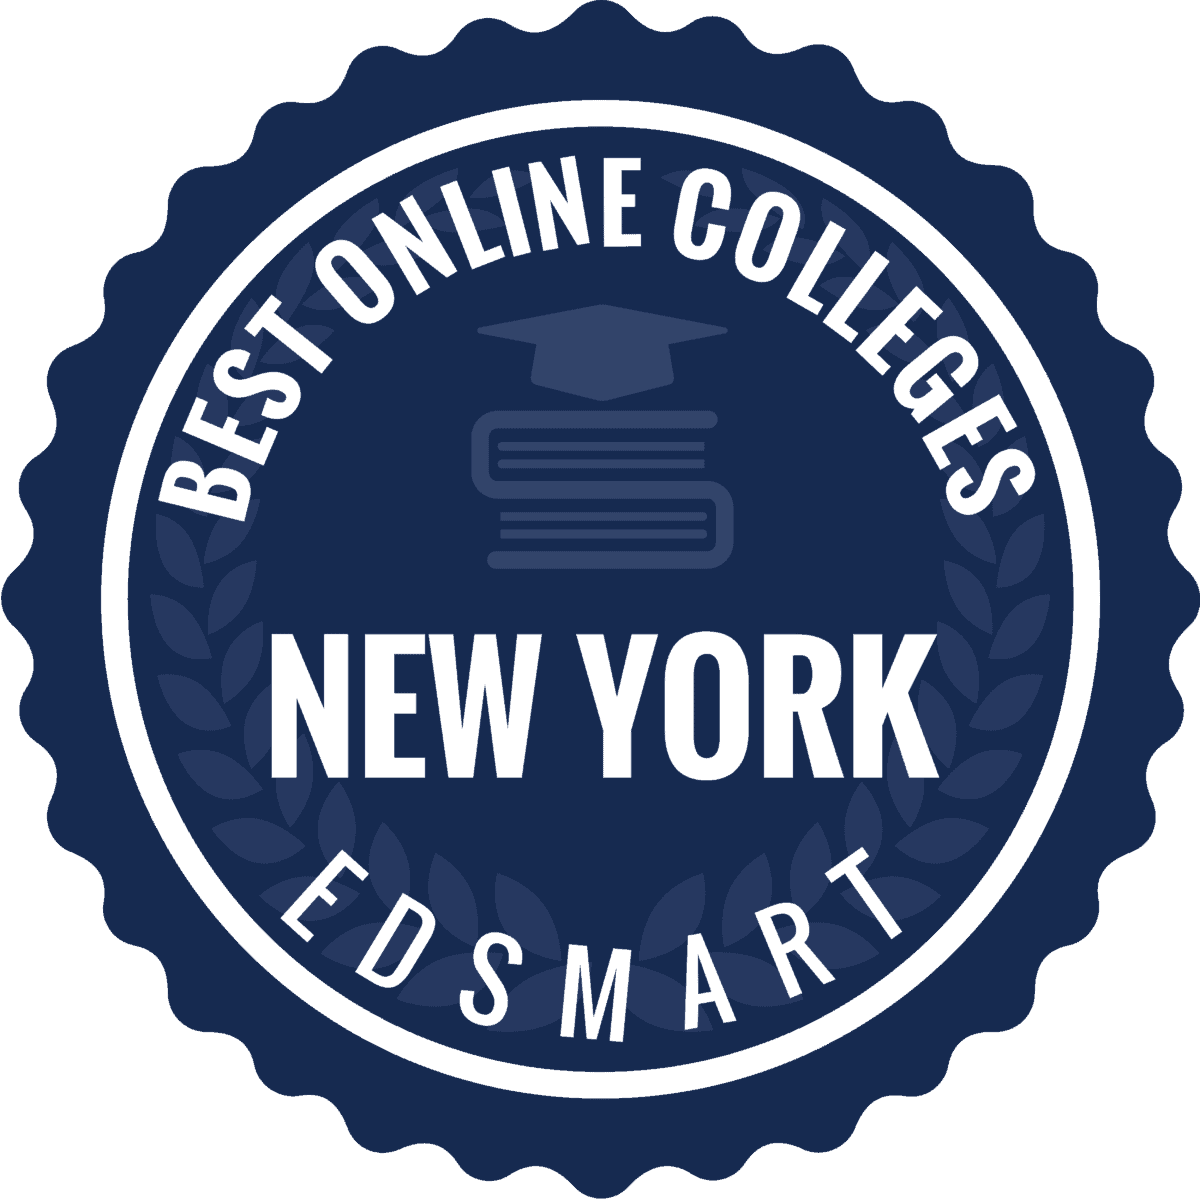 15 Best Accredited Online Colleges In New York 2020 List And Rankings 